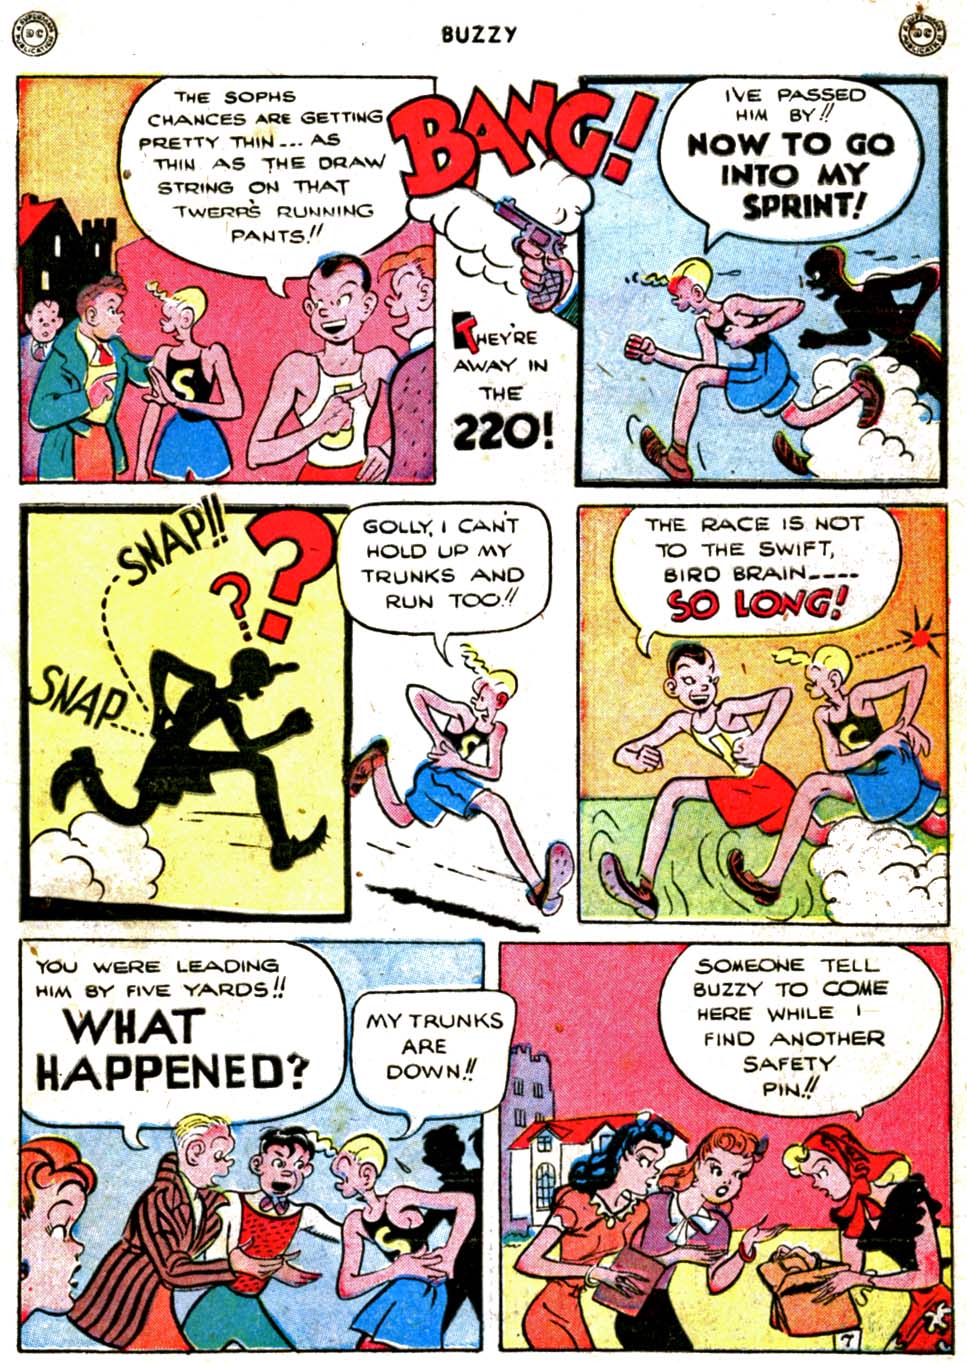 Read online Buzzy comic -  Issue #16 - 9